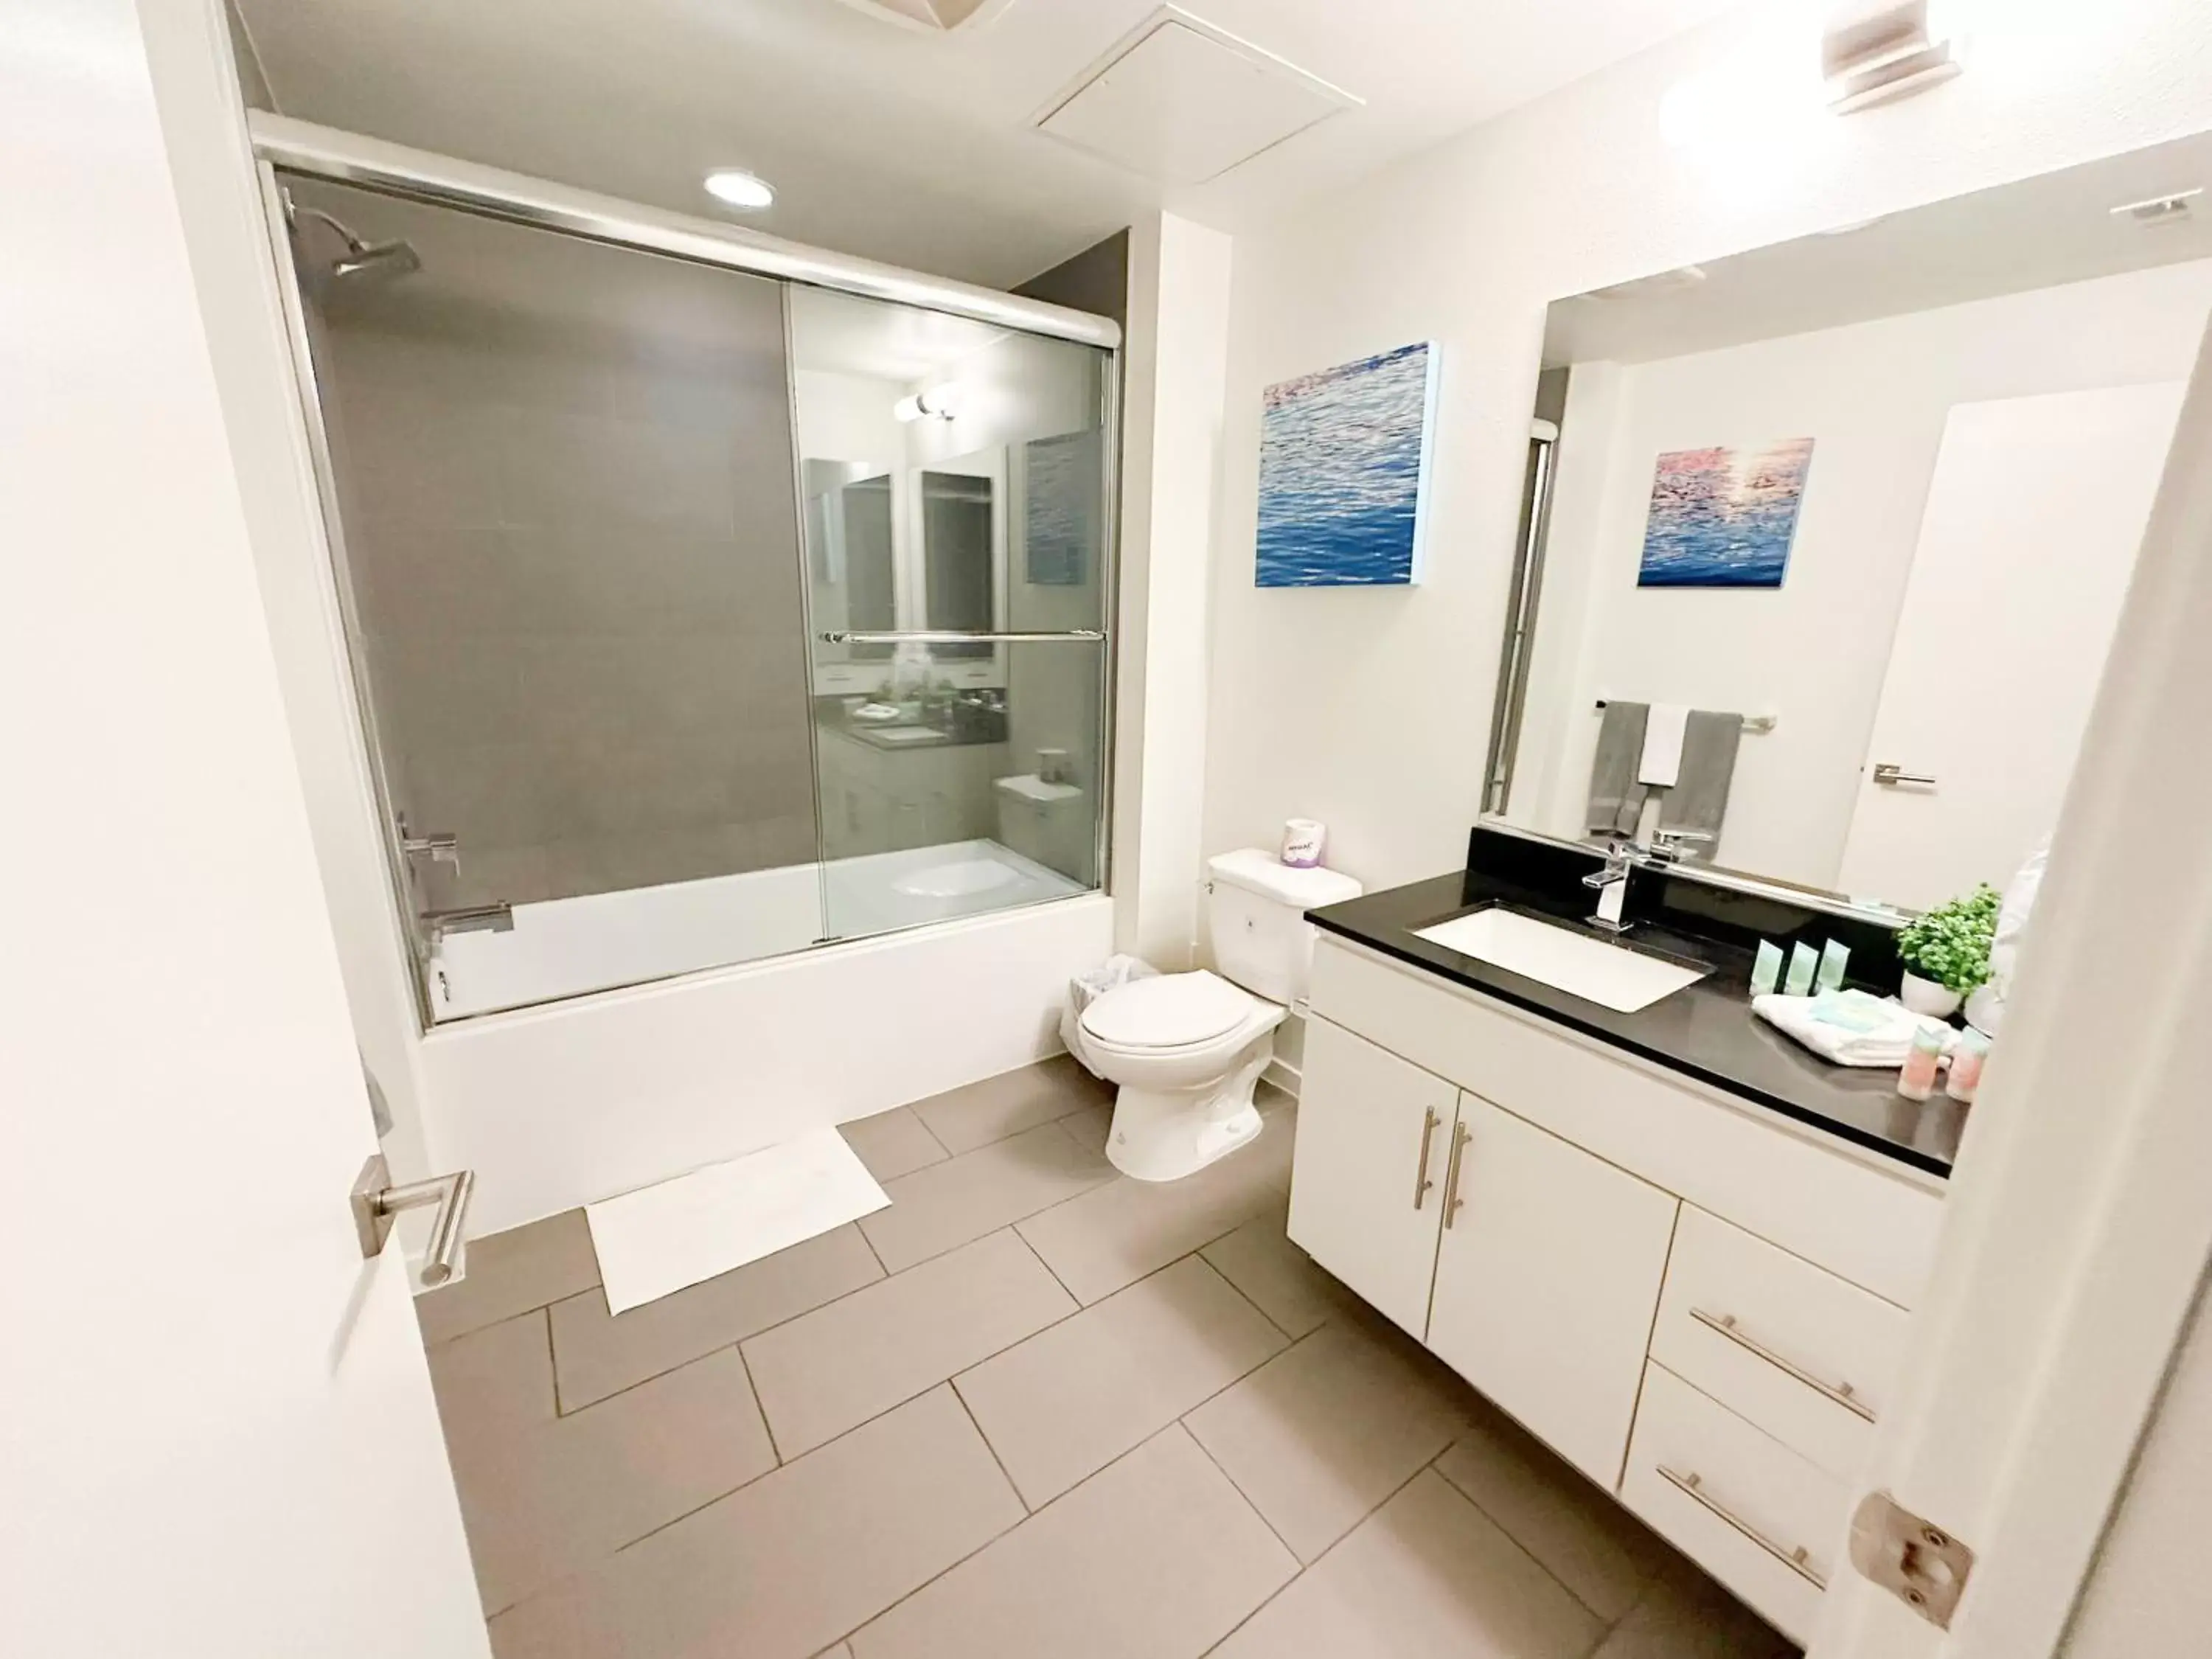 Shower, Bathroom in Cityscape Luxury Rental Homes in the Heart of Los Angeles